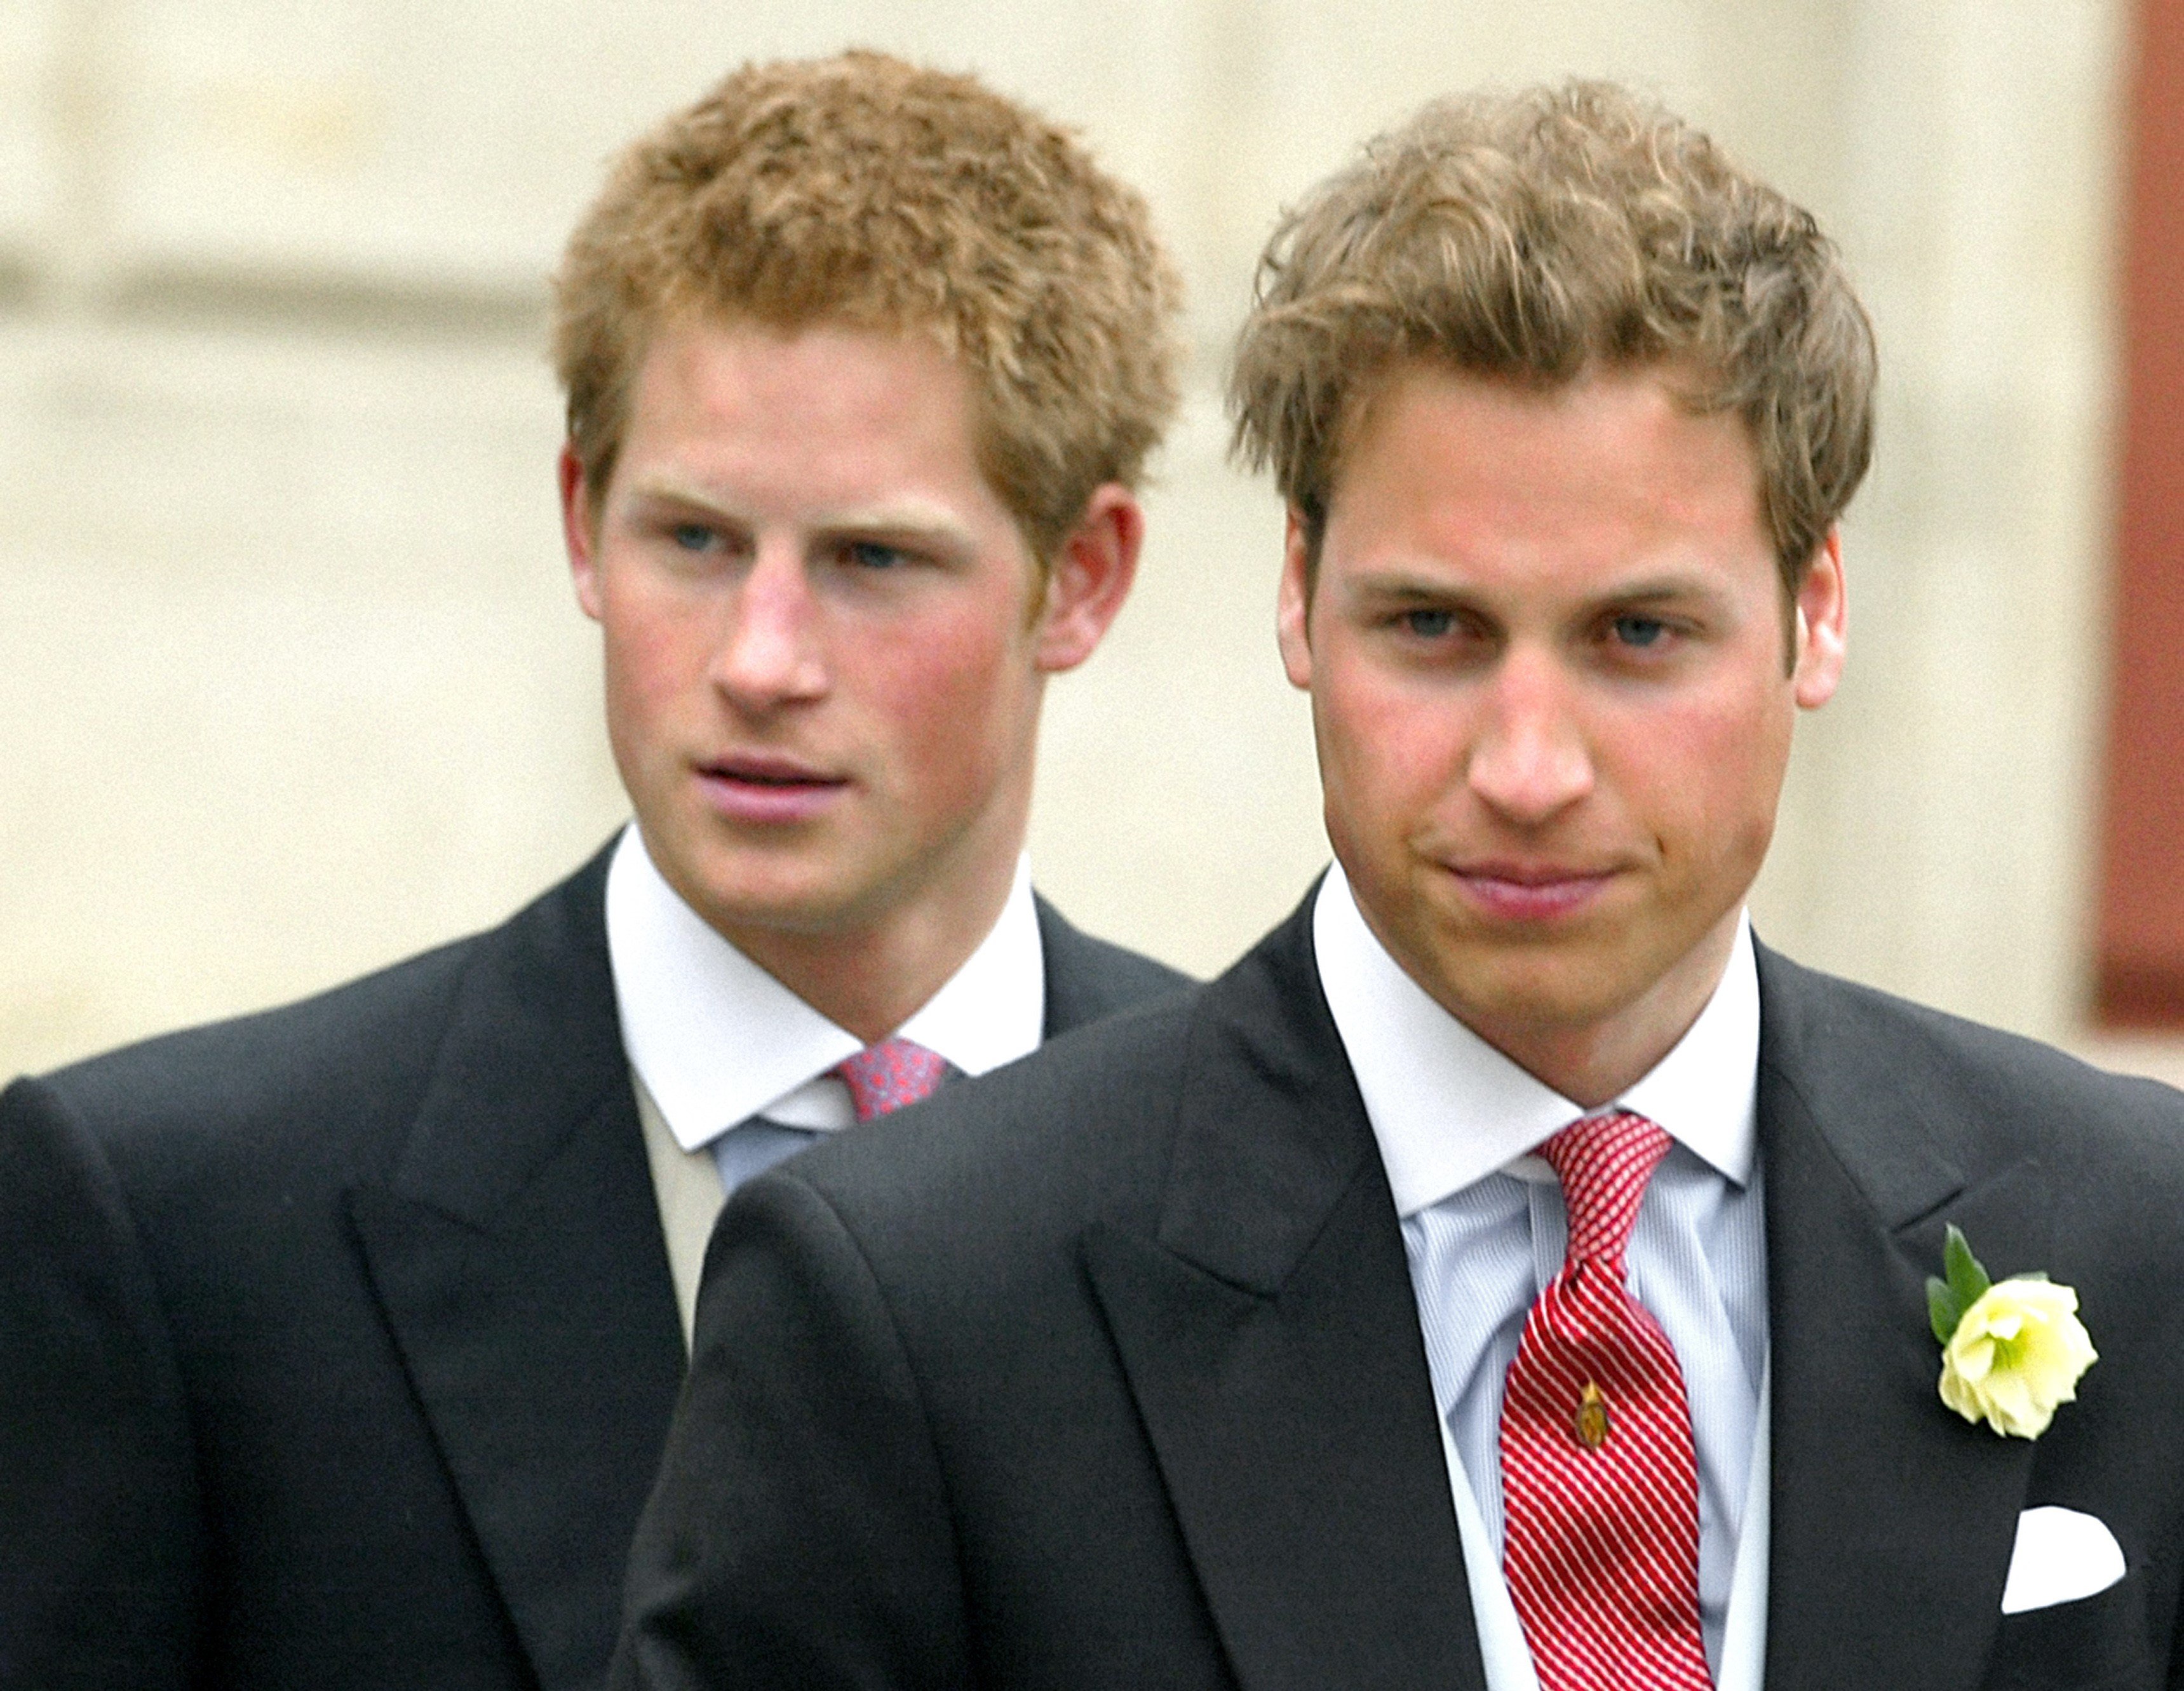 Prince William and Prince Harry leave the civil wedding after their father, Prince Charles, married Camilla Parker Bowles